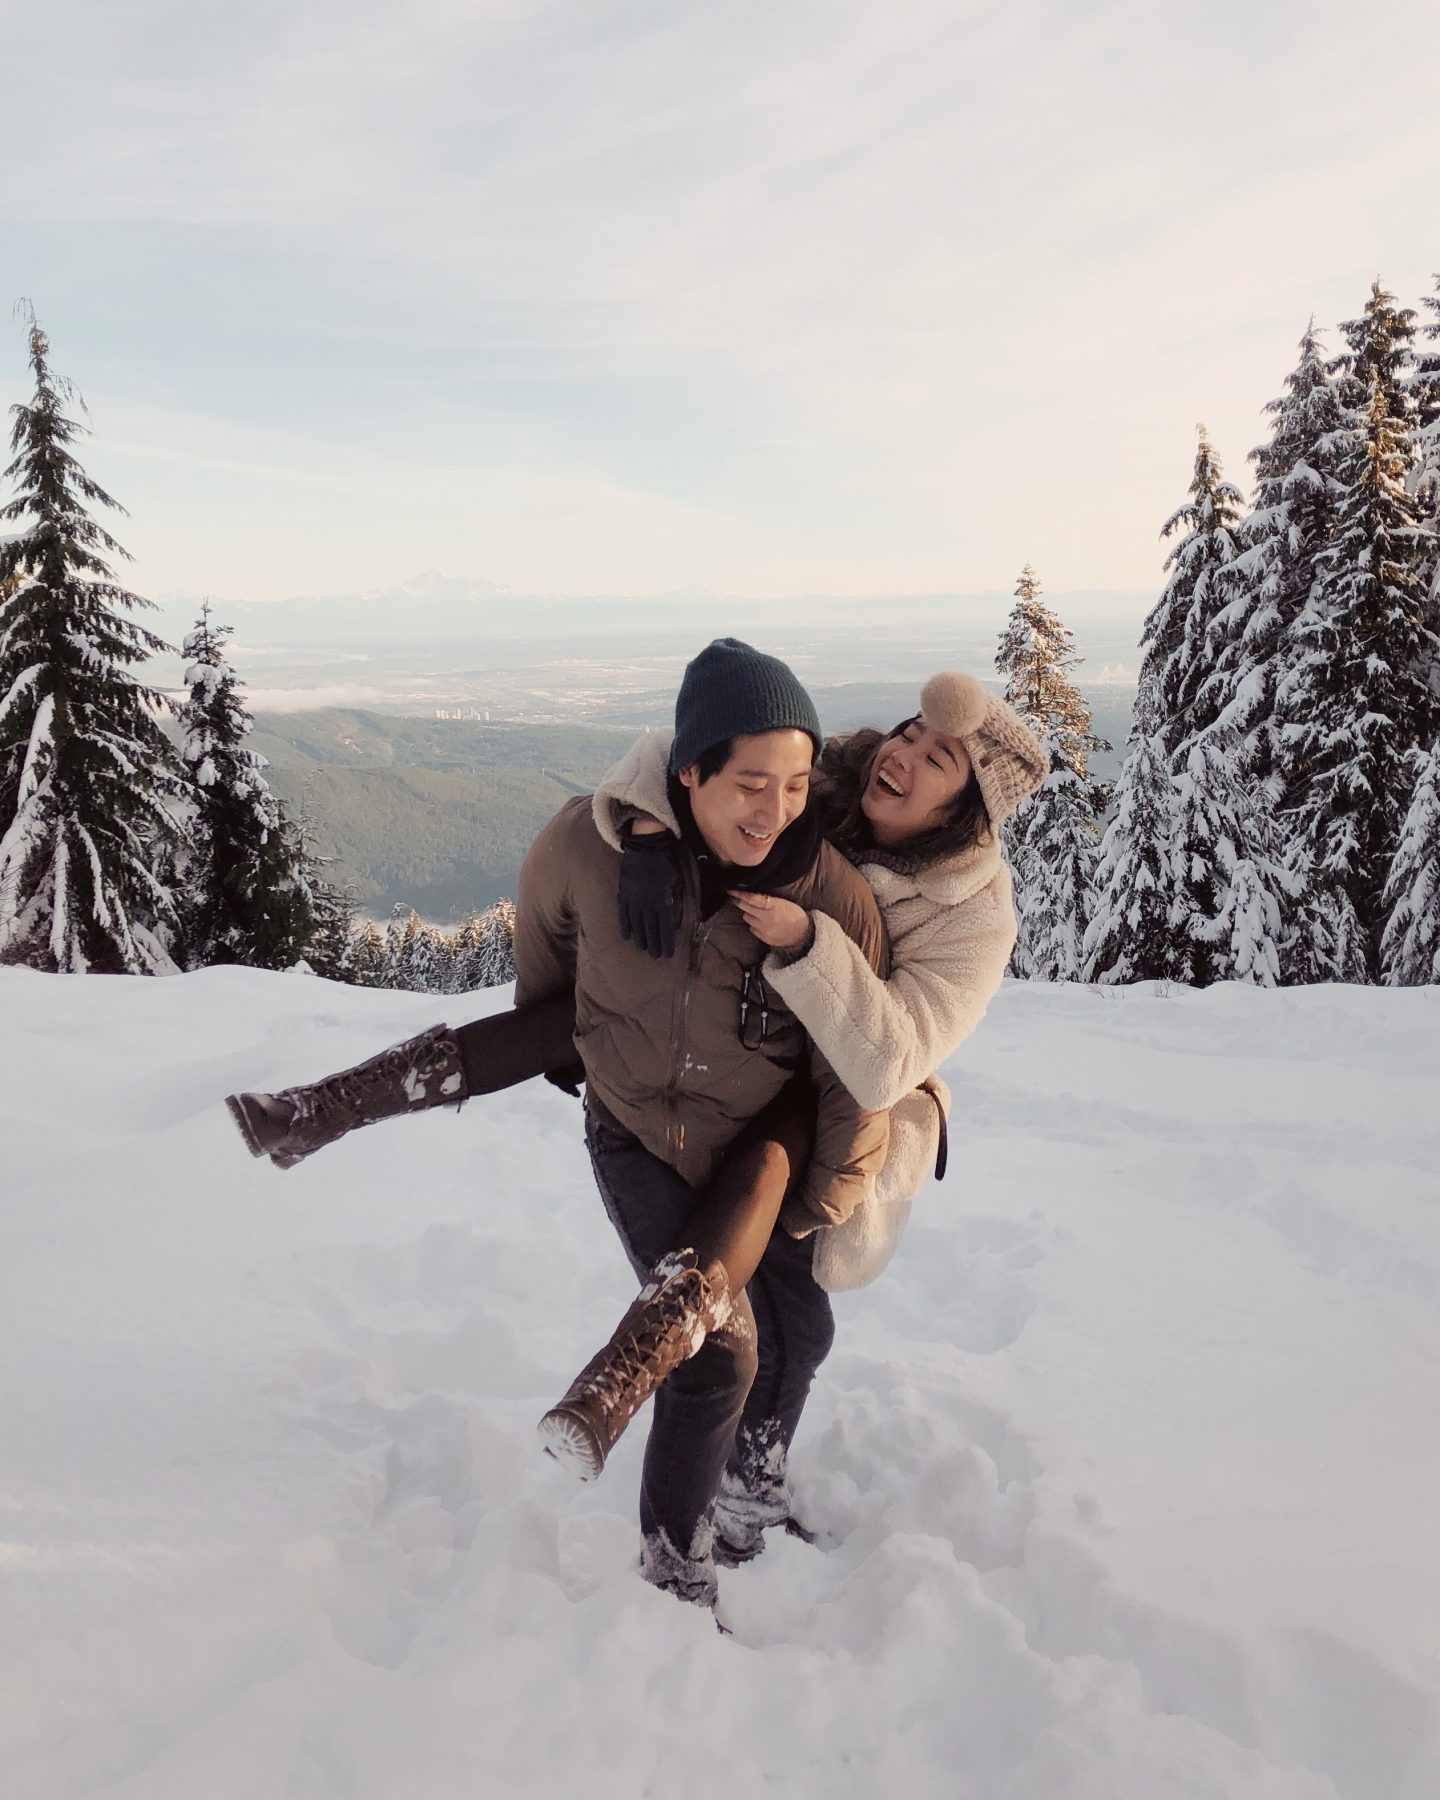 Big hugs and love in the snow with my boyfriend 